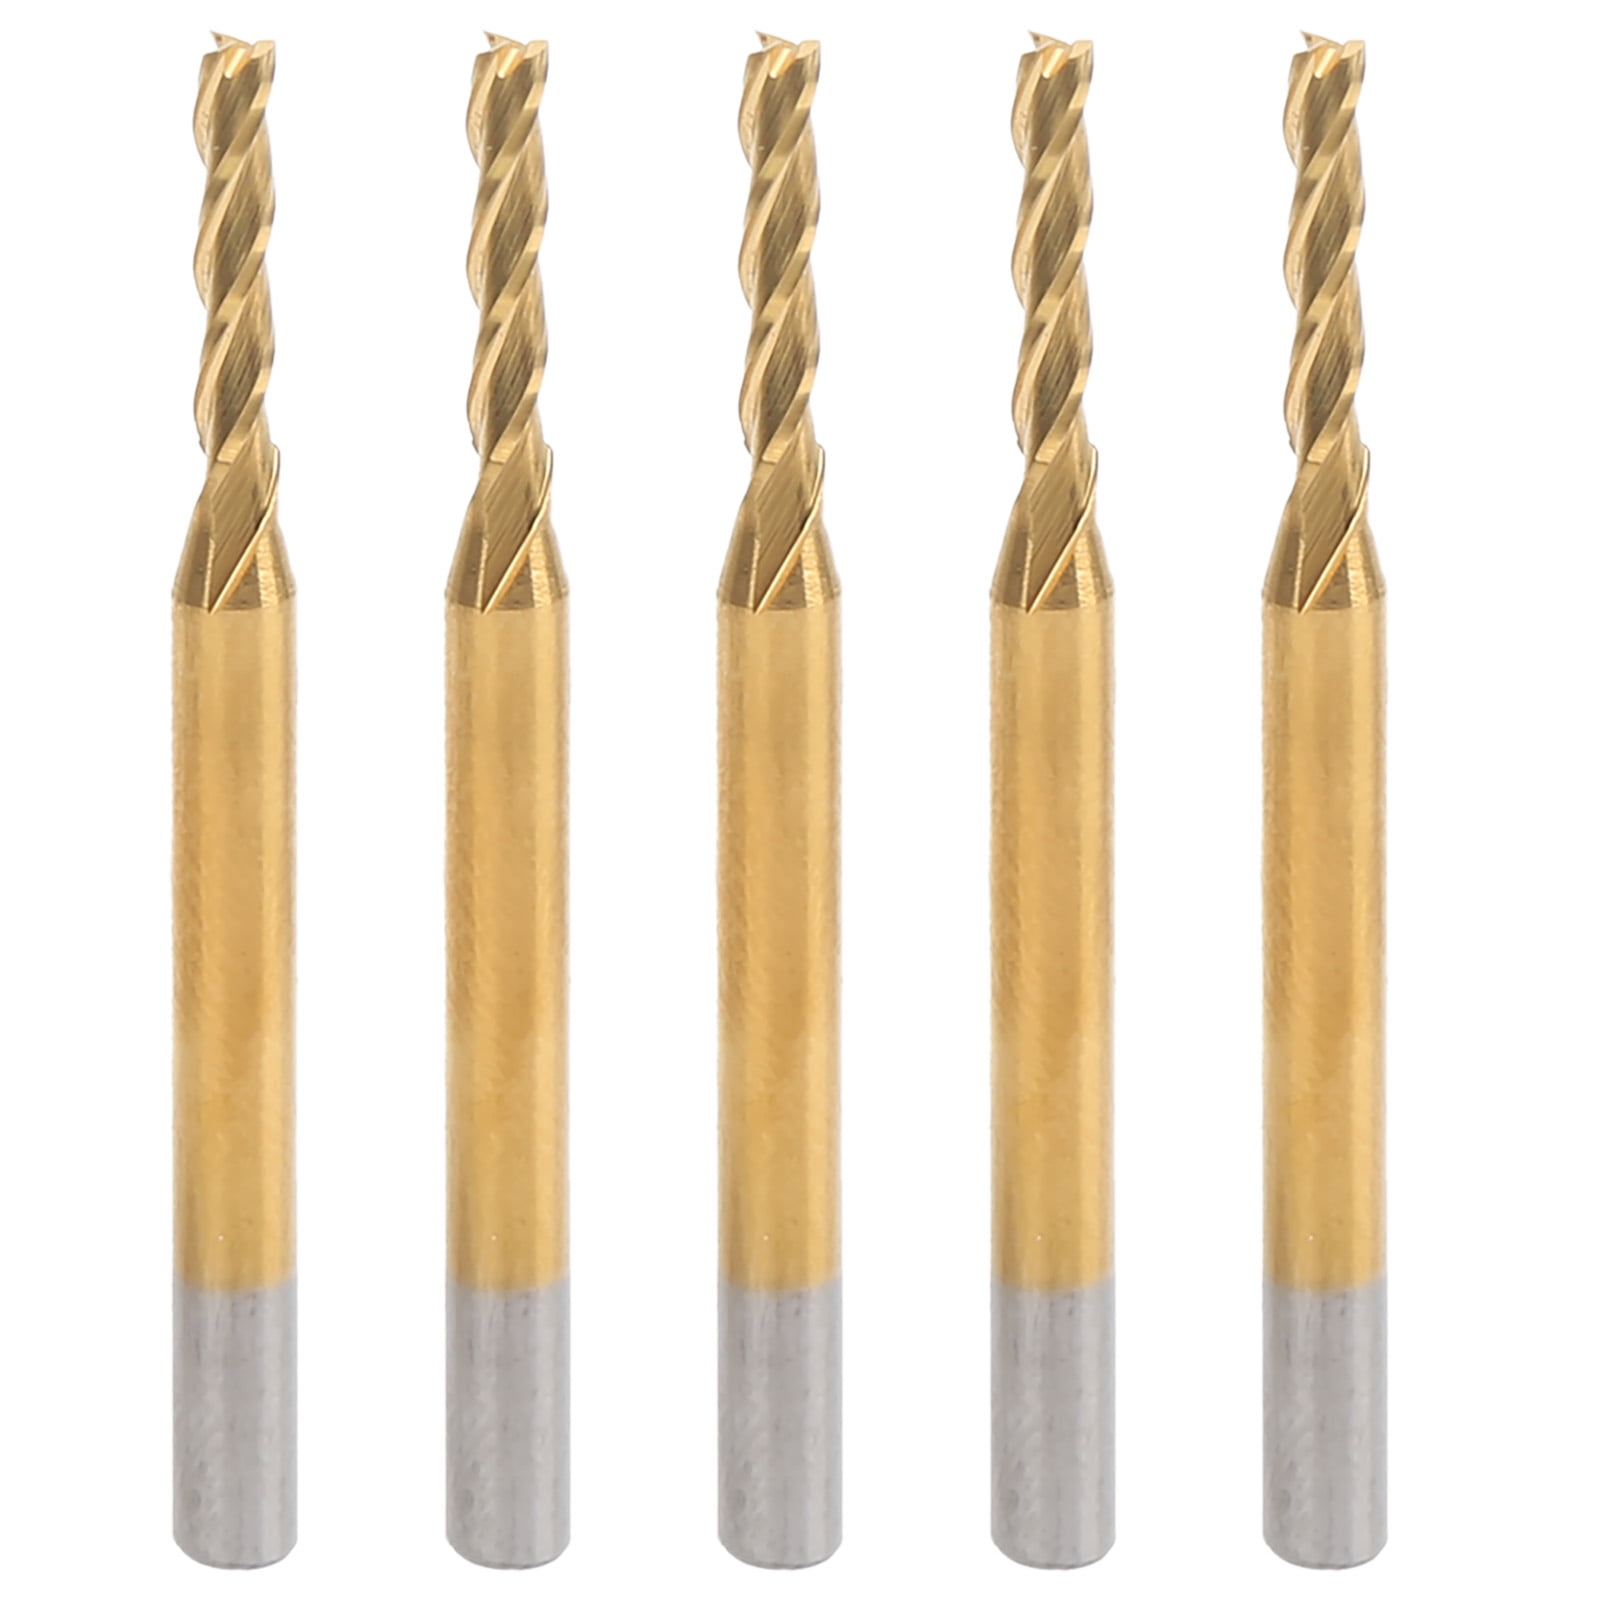 Plywood Acrylic Resin,PCB 5Pcs 3‑Flute Flat End Milling Cutter,Tungsten Steel Round Shank Cutting Bit,Strong and Durable,for Engraving Plastic Fiber Drilling and Milling of Hardwood 